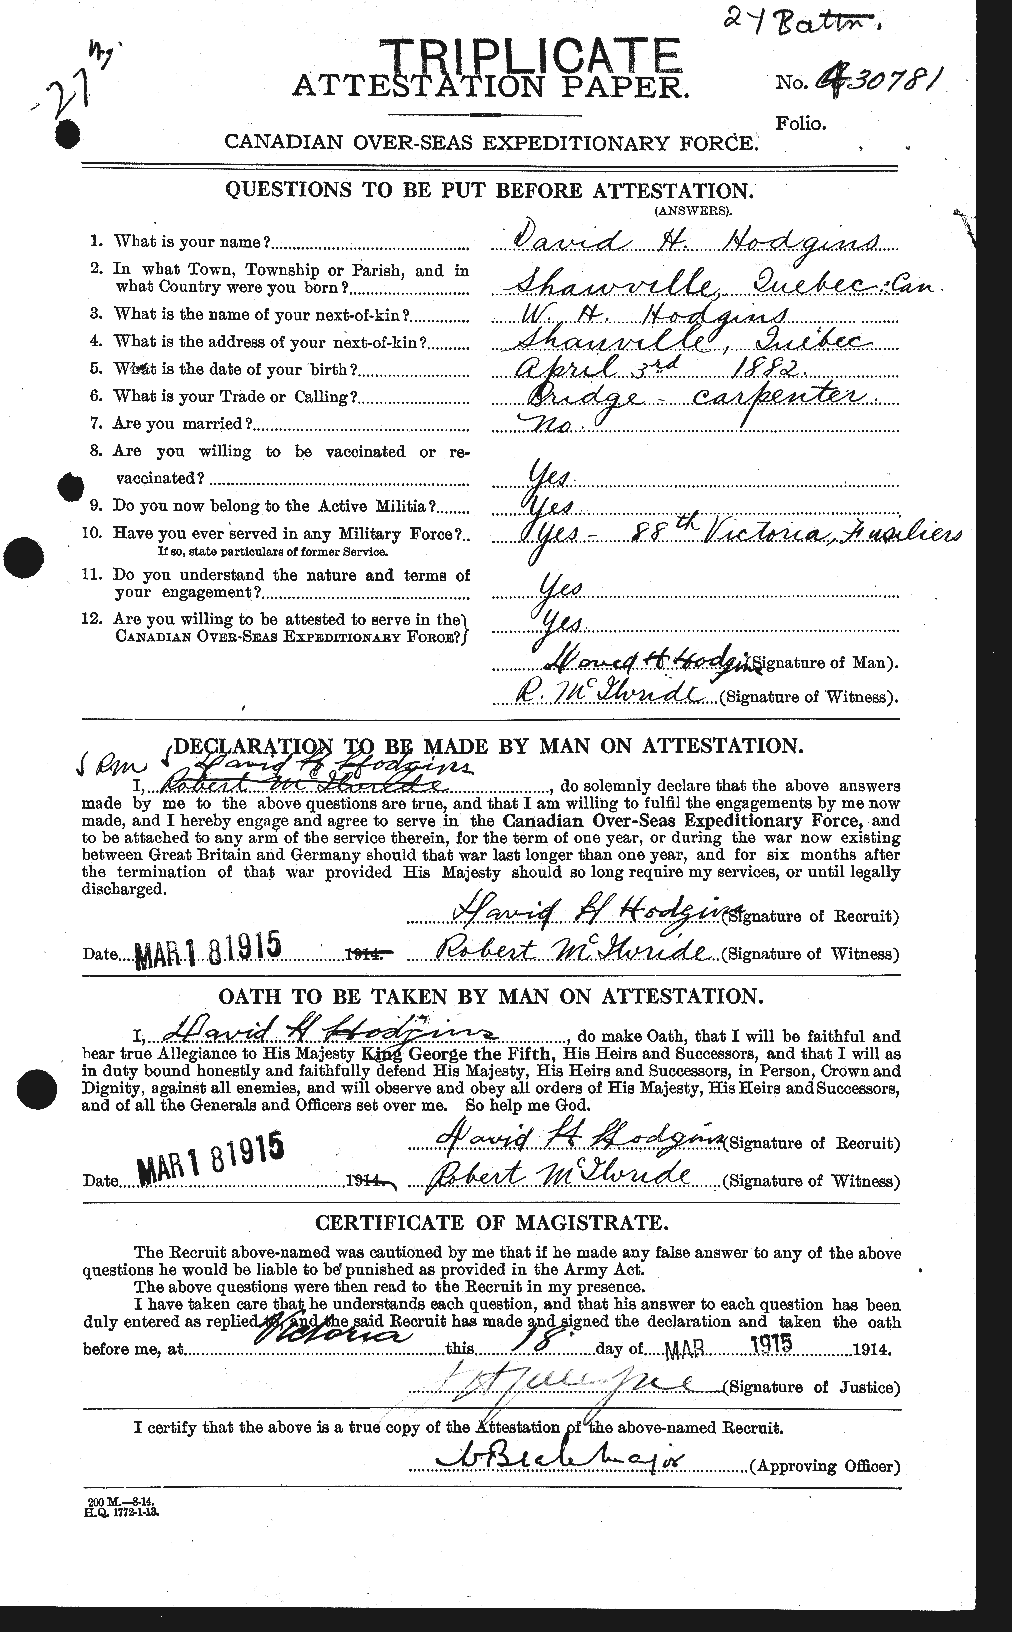 Personnel Records of the First World War - CEF 395209a